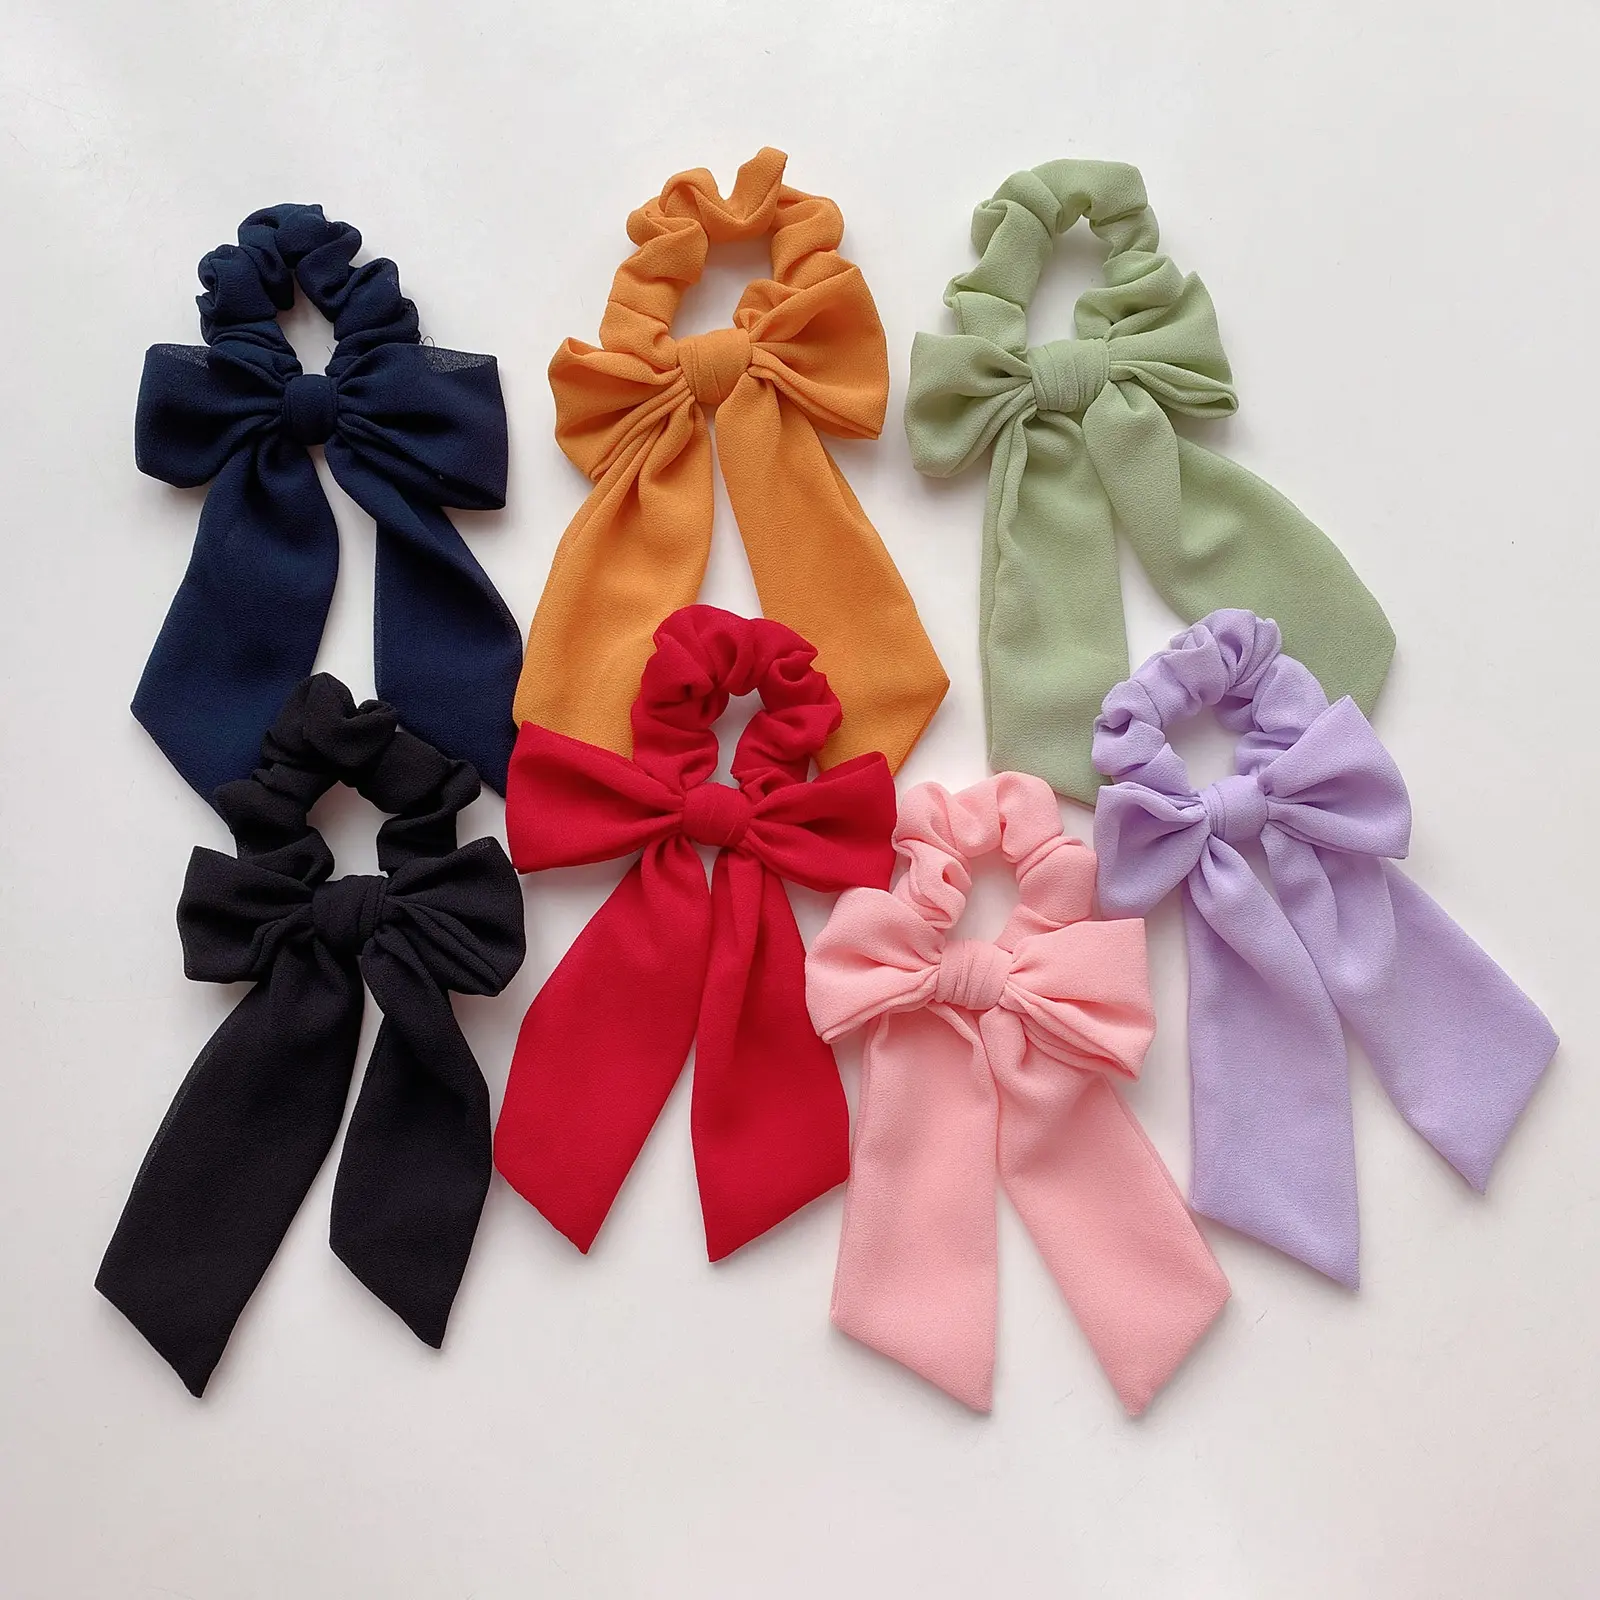 Bow solid color chiffon vintage hair accessories women elastic hair tie accessory hair ribbons for girls